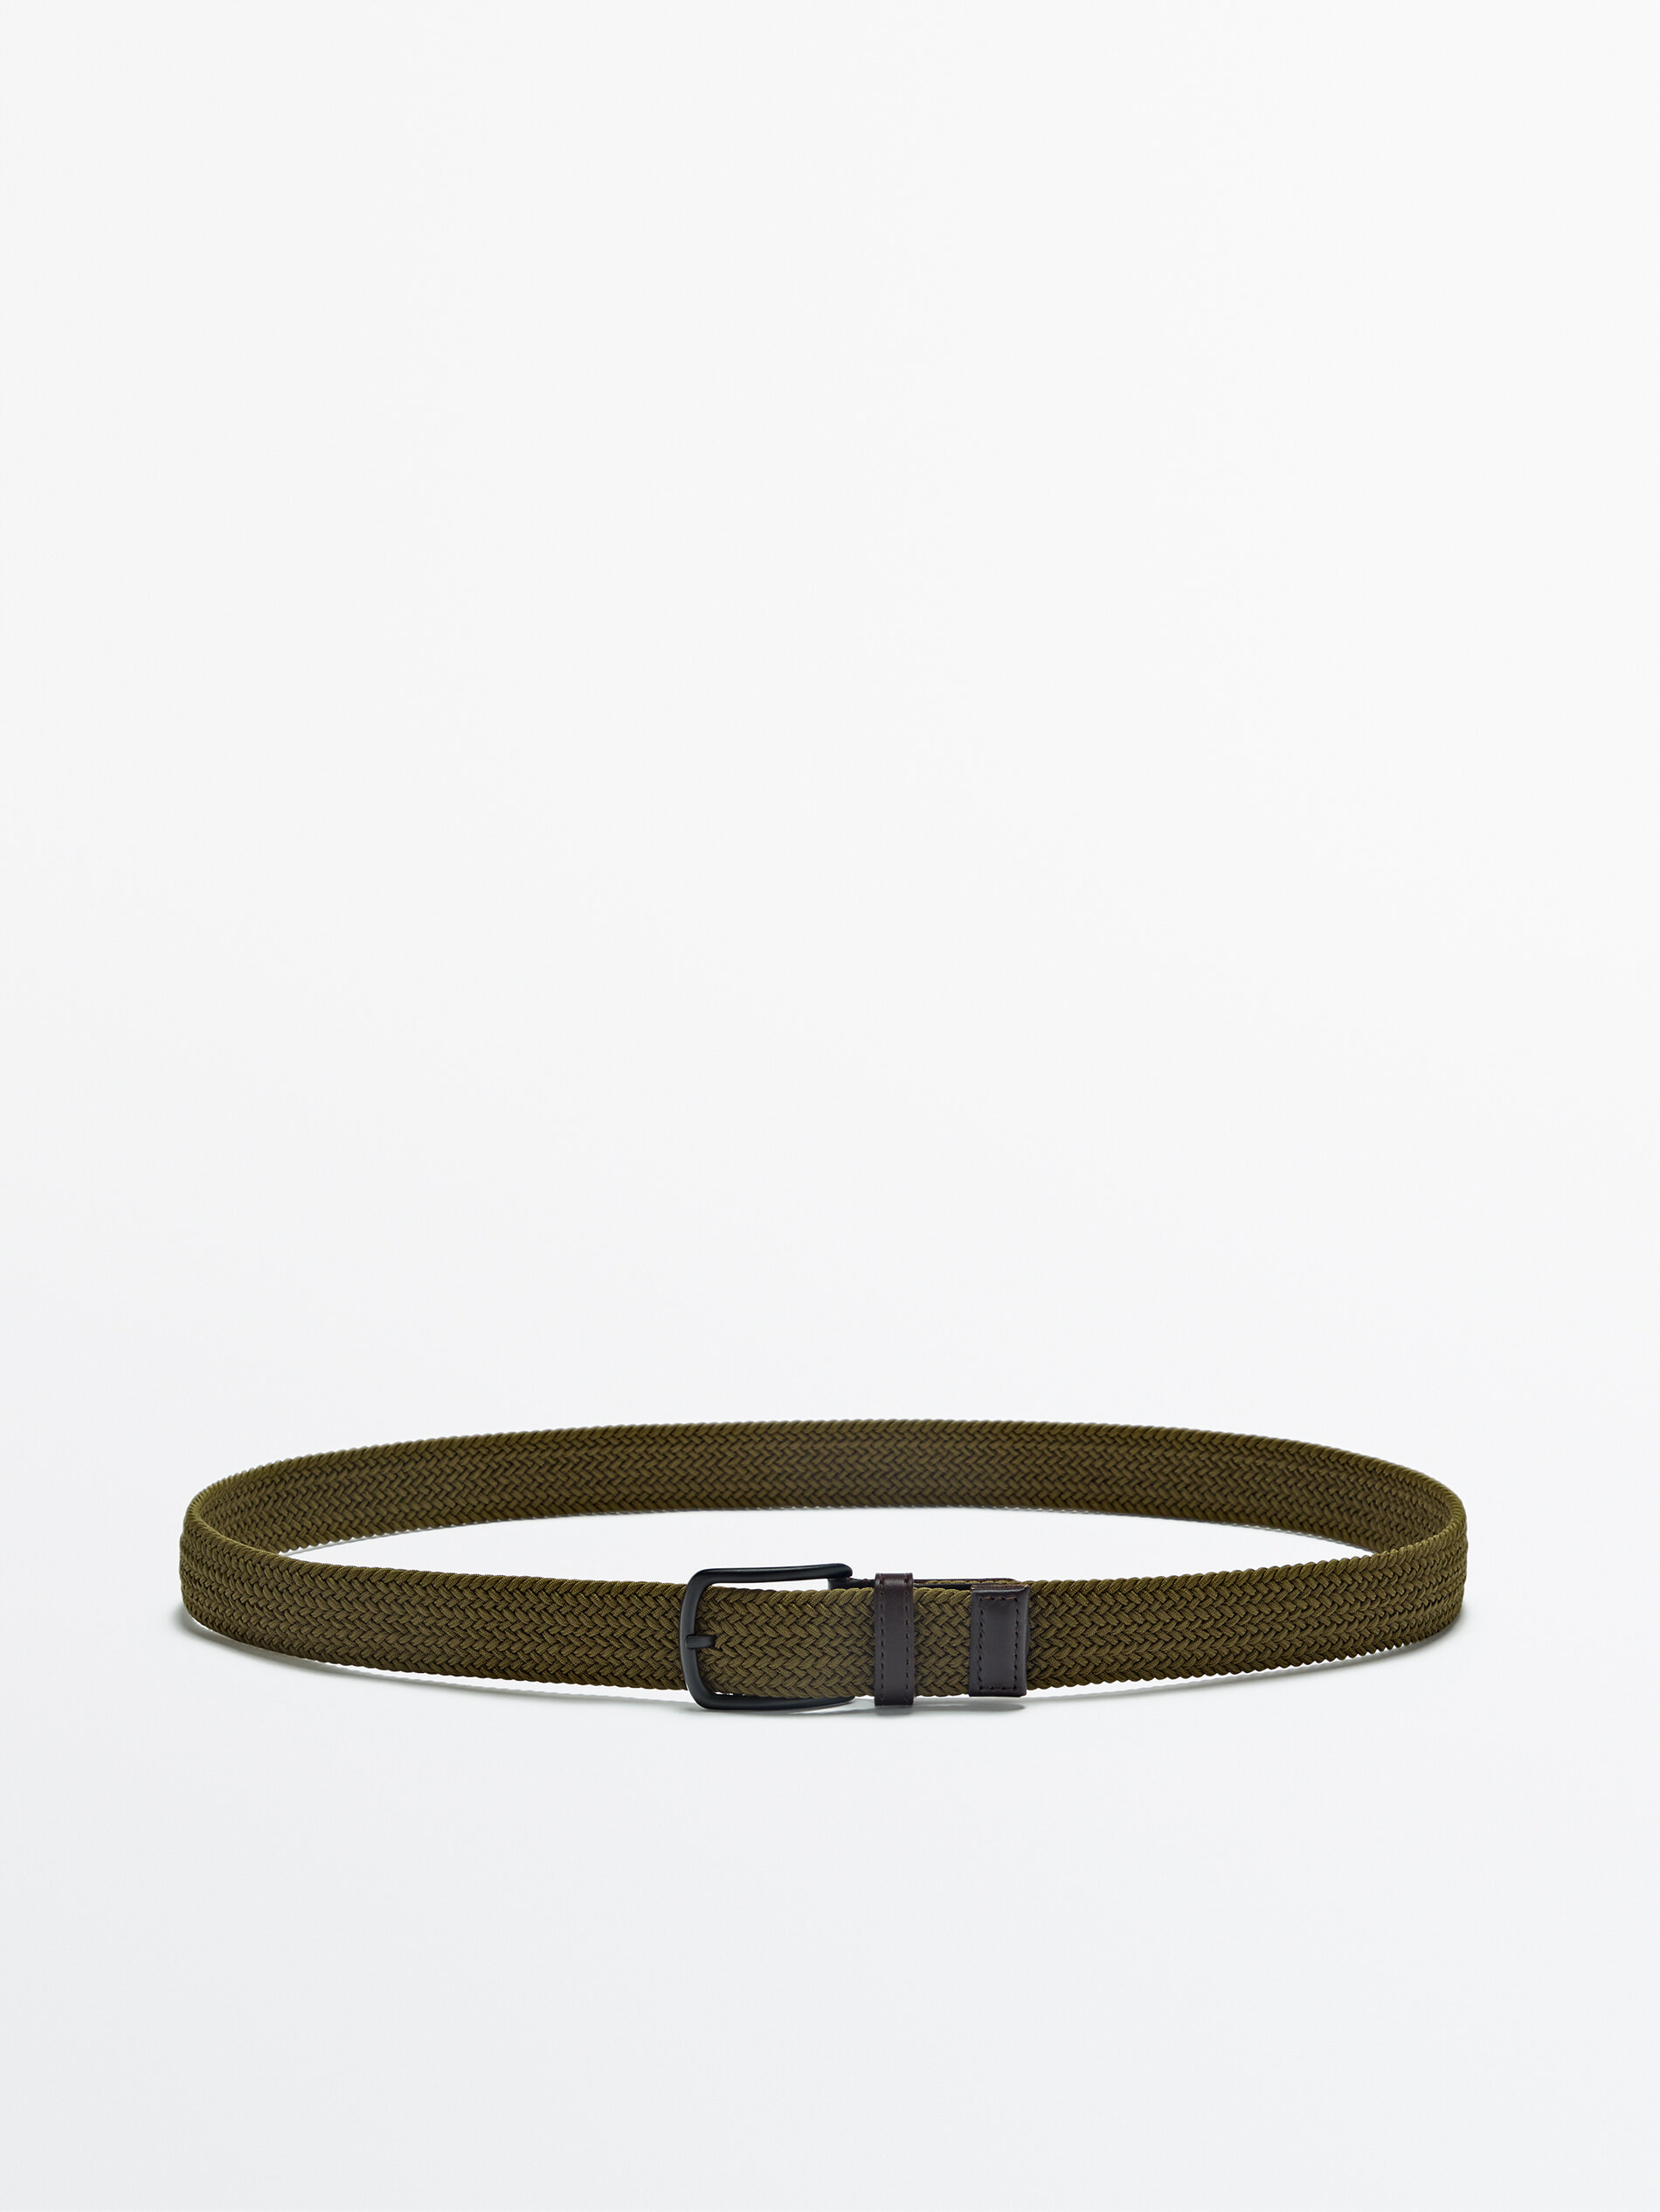 Massimo Dutti - Stretch belt with leather details